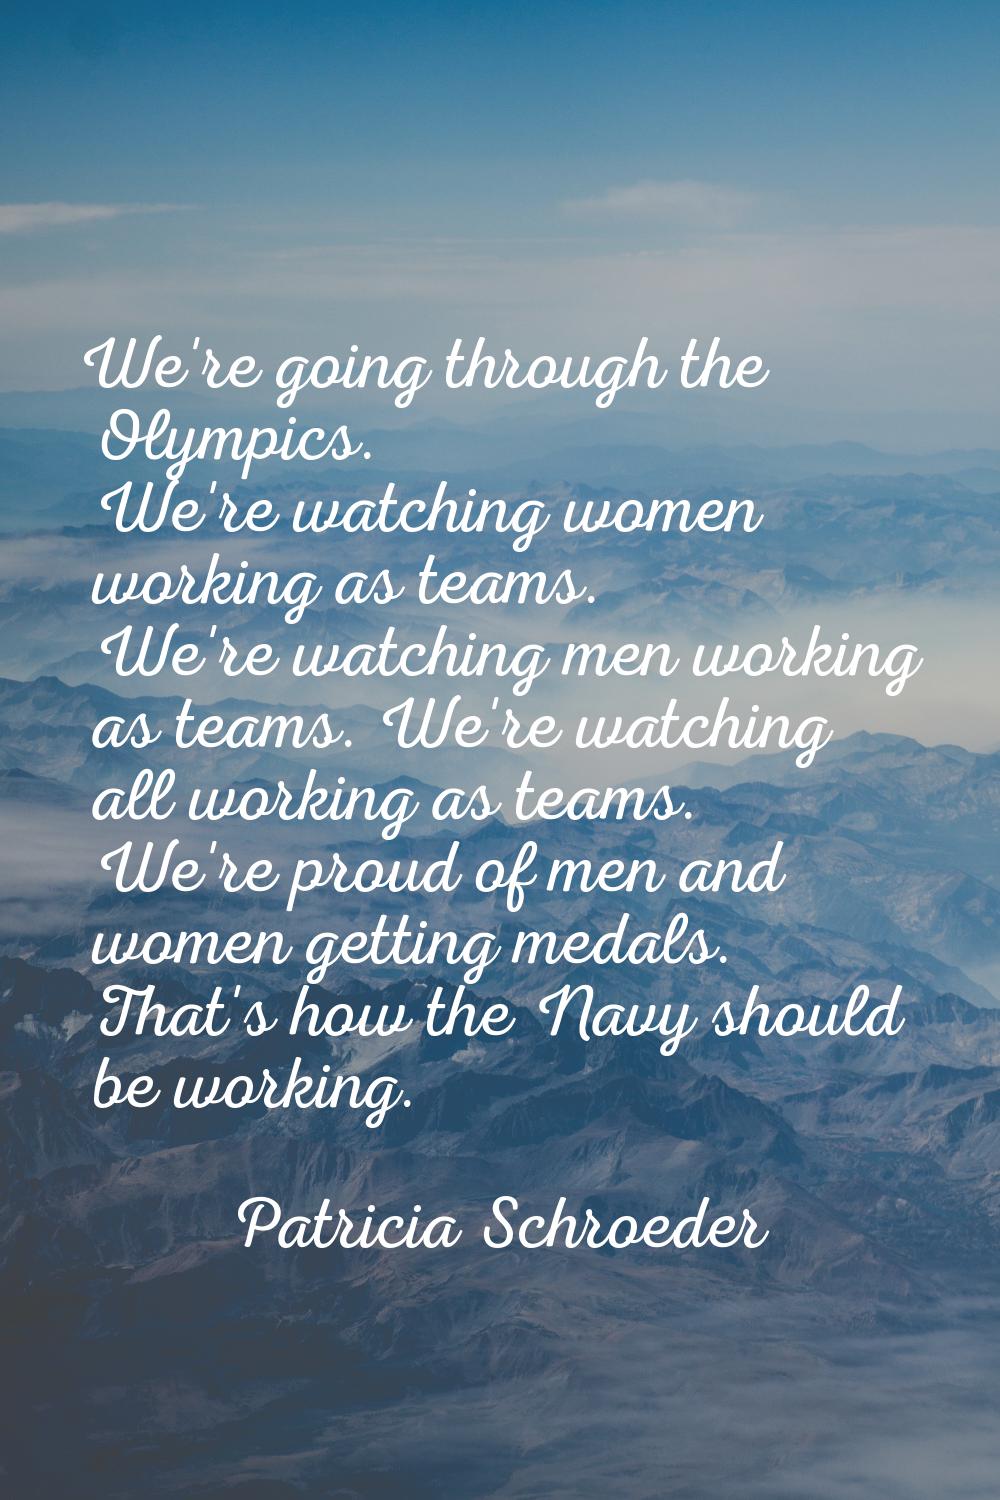 We're going through the Olympics. We're watching women working as teams. We're watching men working